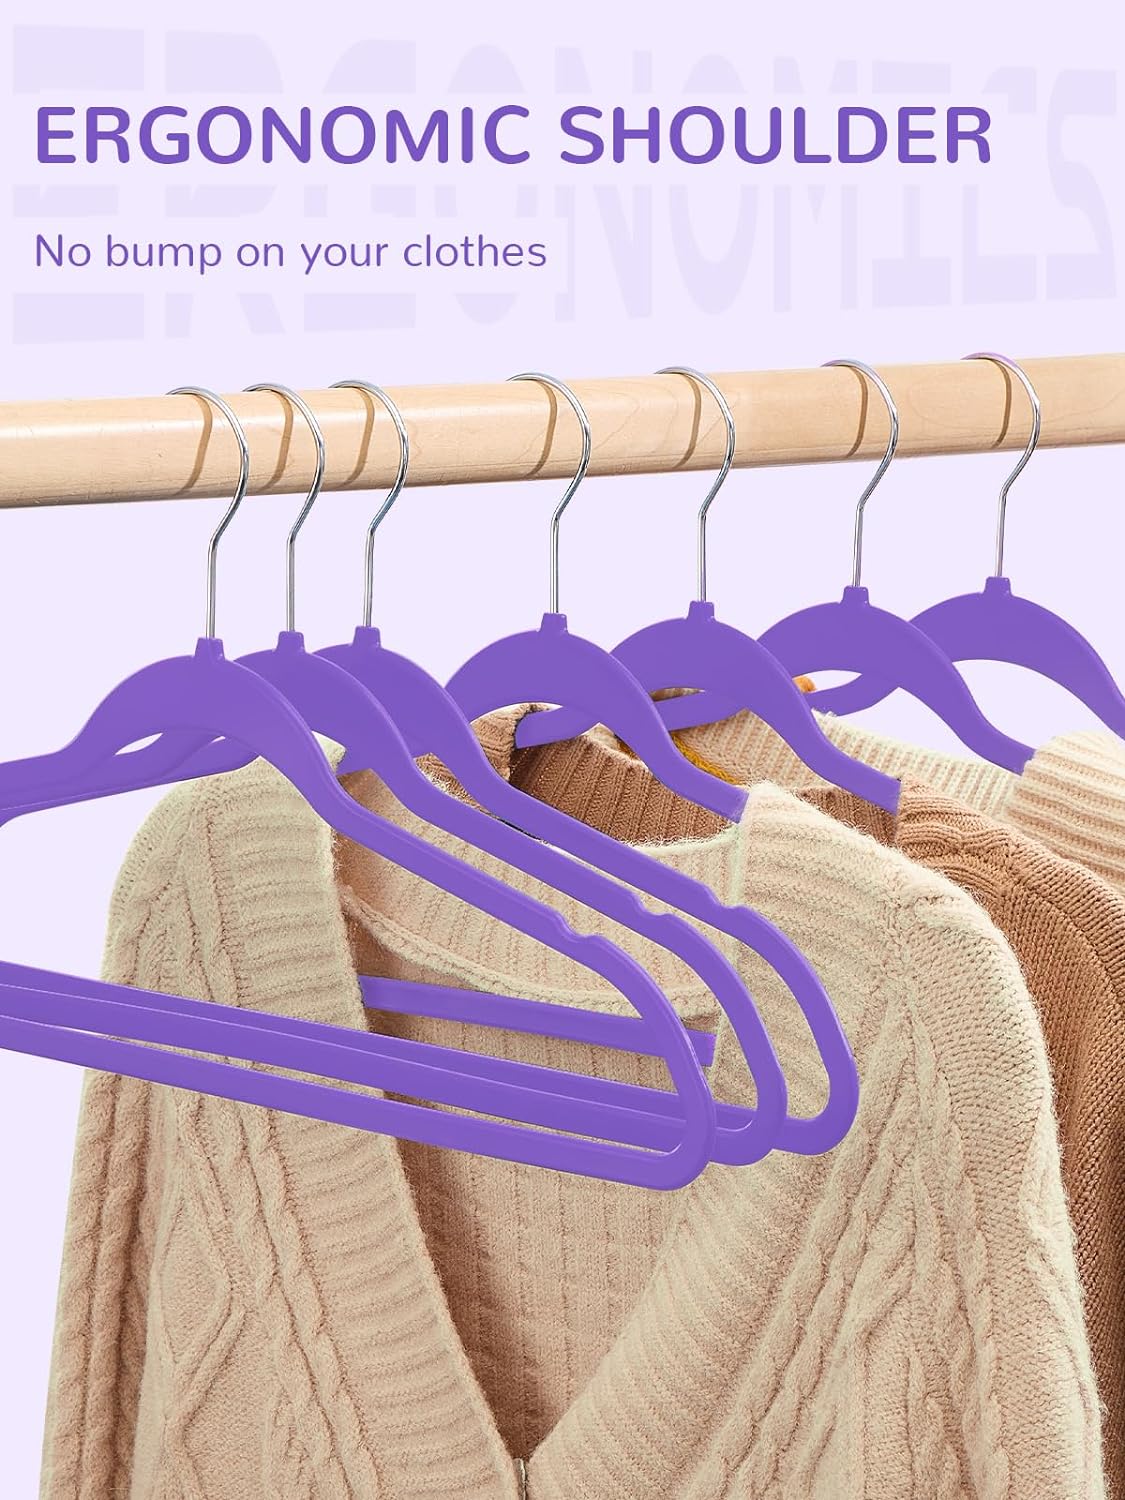 HOUSE DAY 17.5 Inch Plastic Hangers Purple 20 Pack